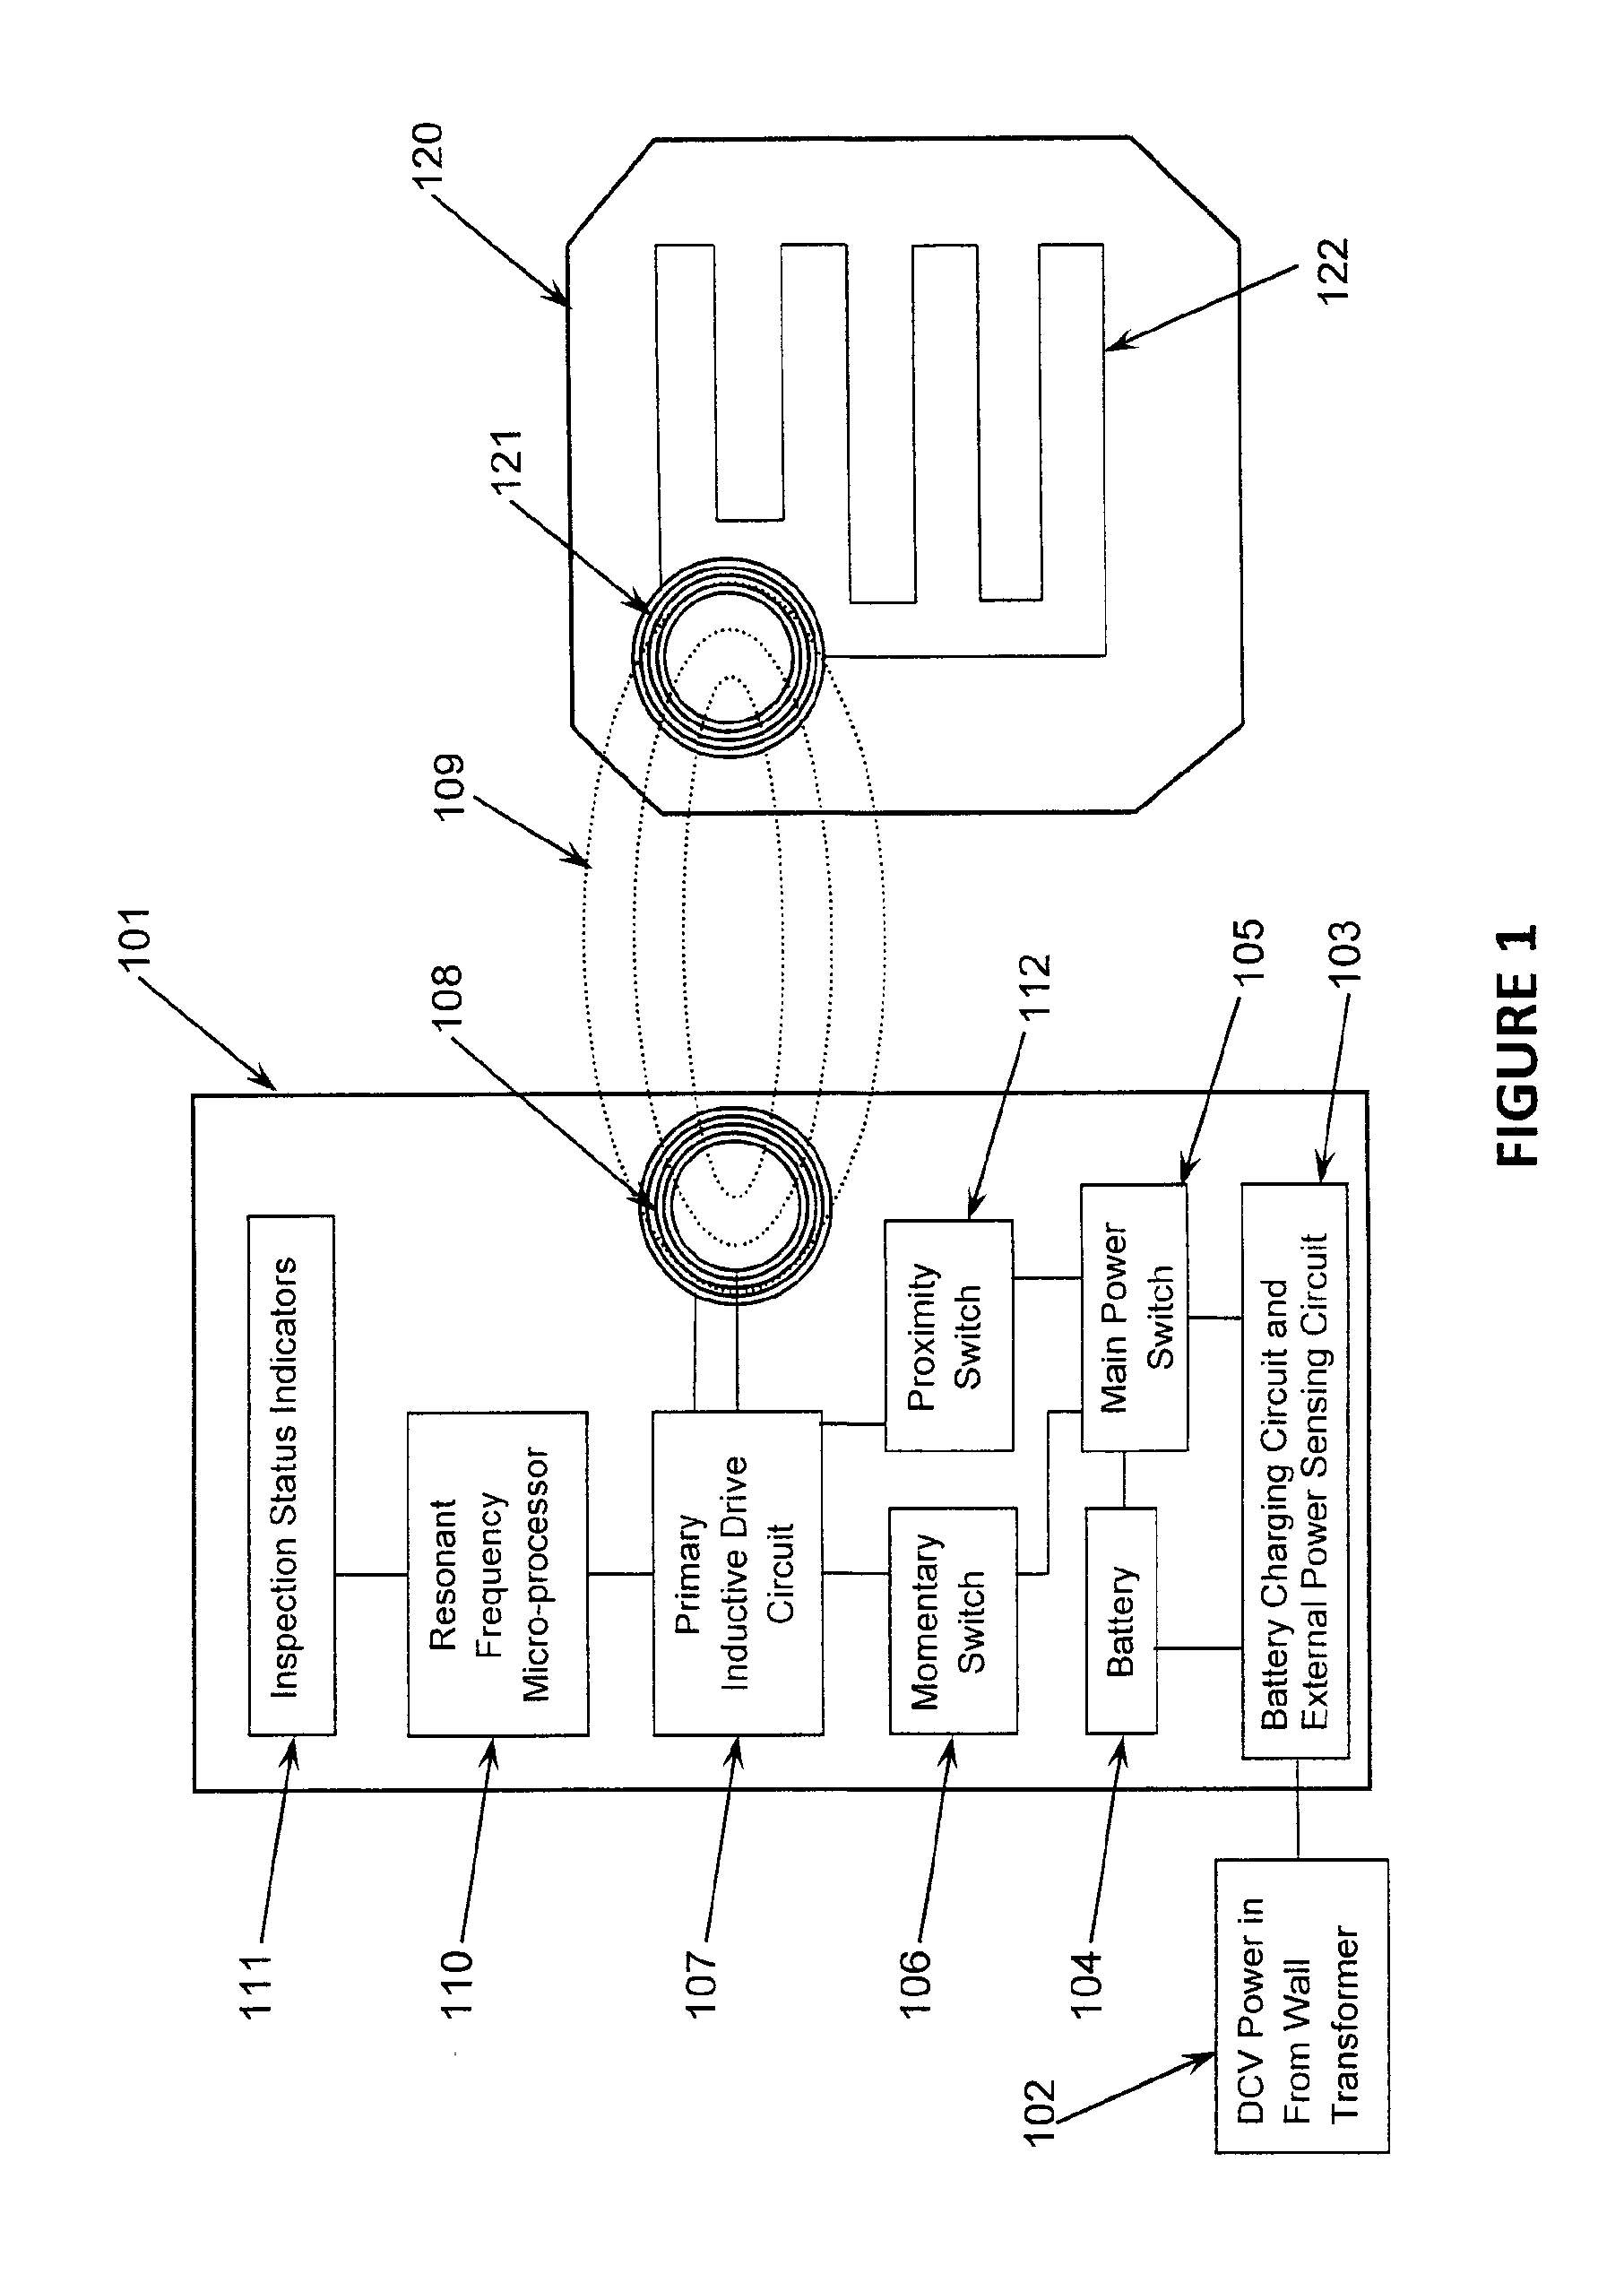 Wireless method and apparatus for detecting damage in ceramic body armor